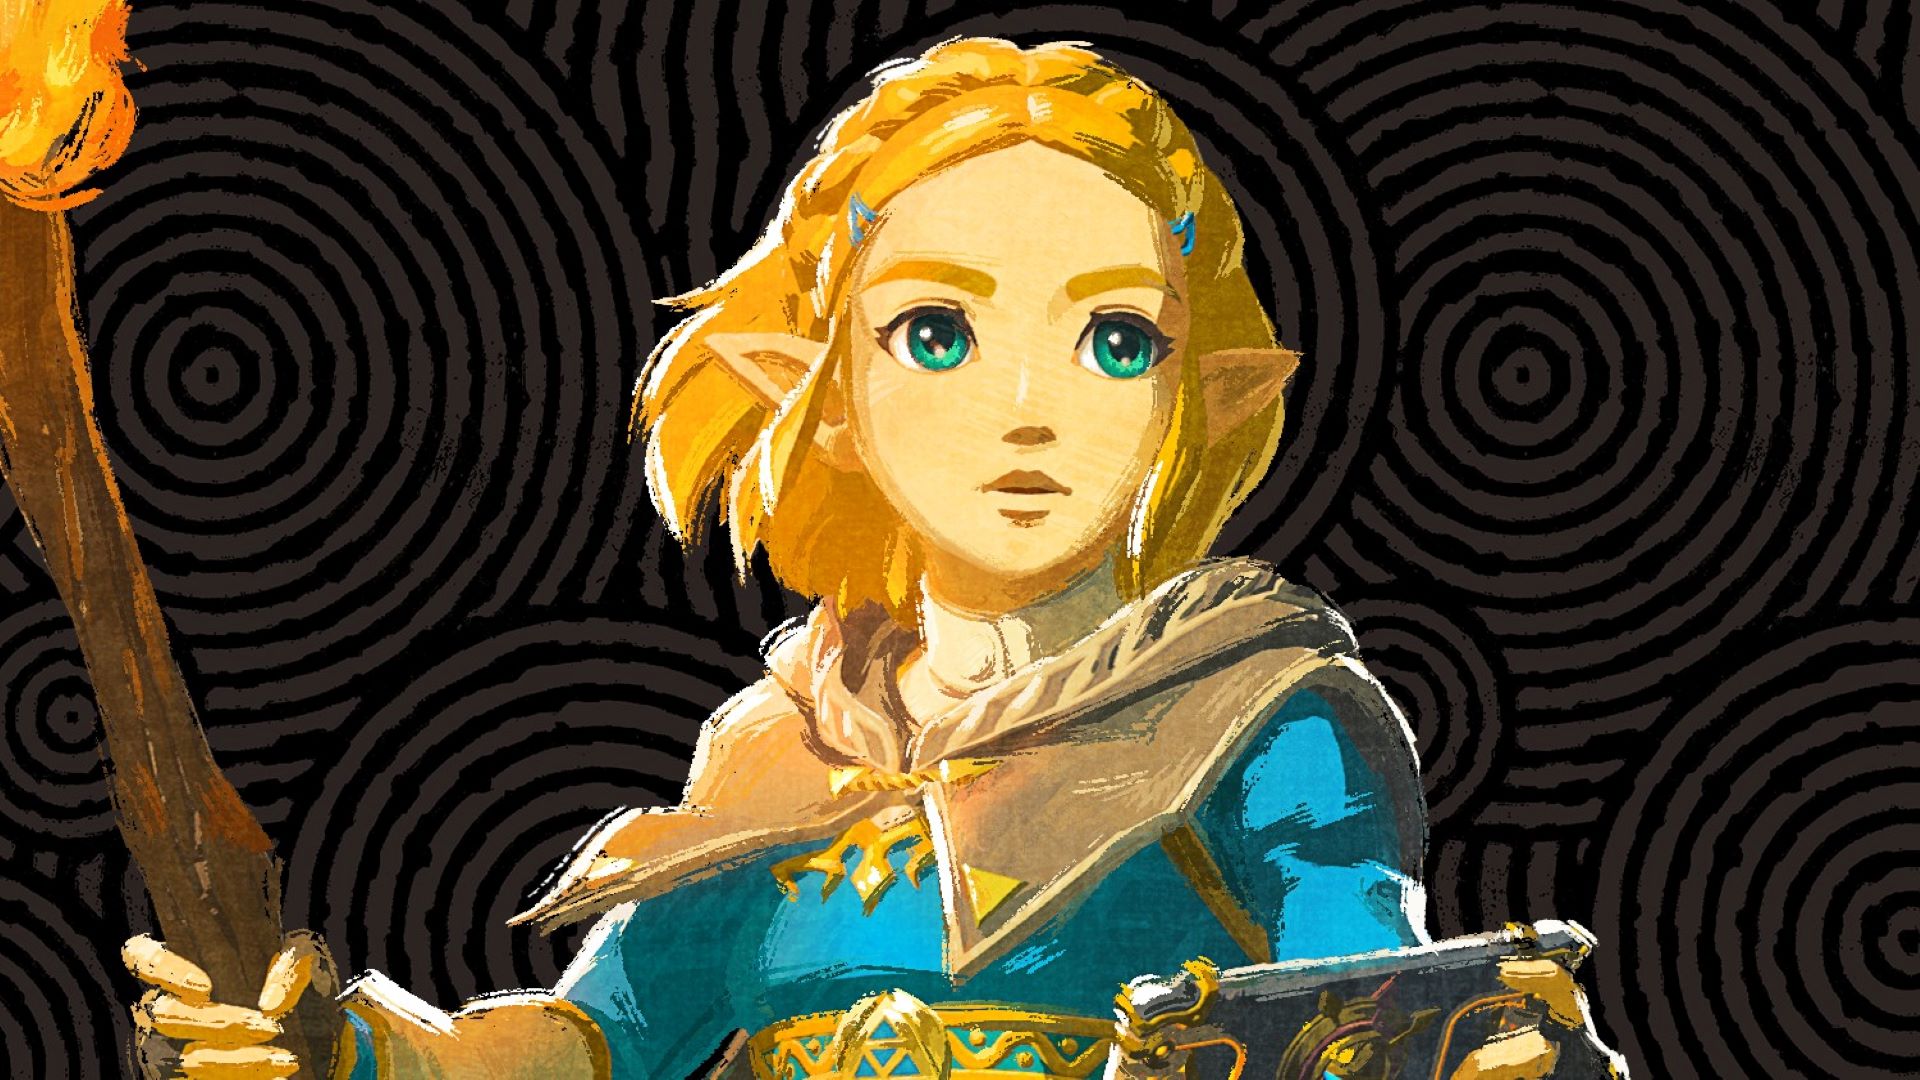 Three Years Later, Breath of the Wild's Final Trailer is Still the Best  I've Ever Seen - Zelda Dungeon